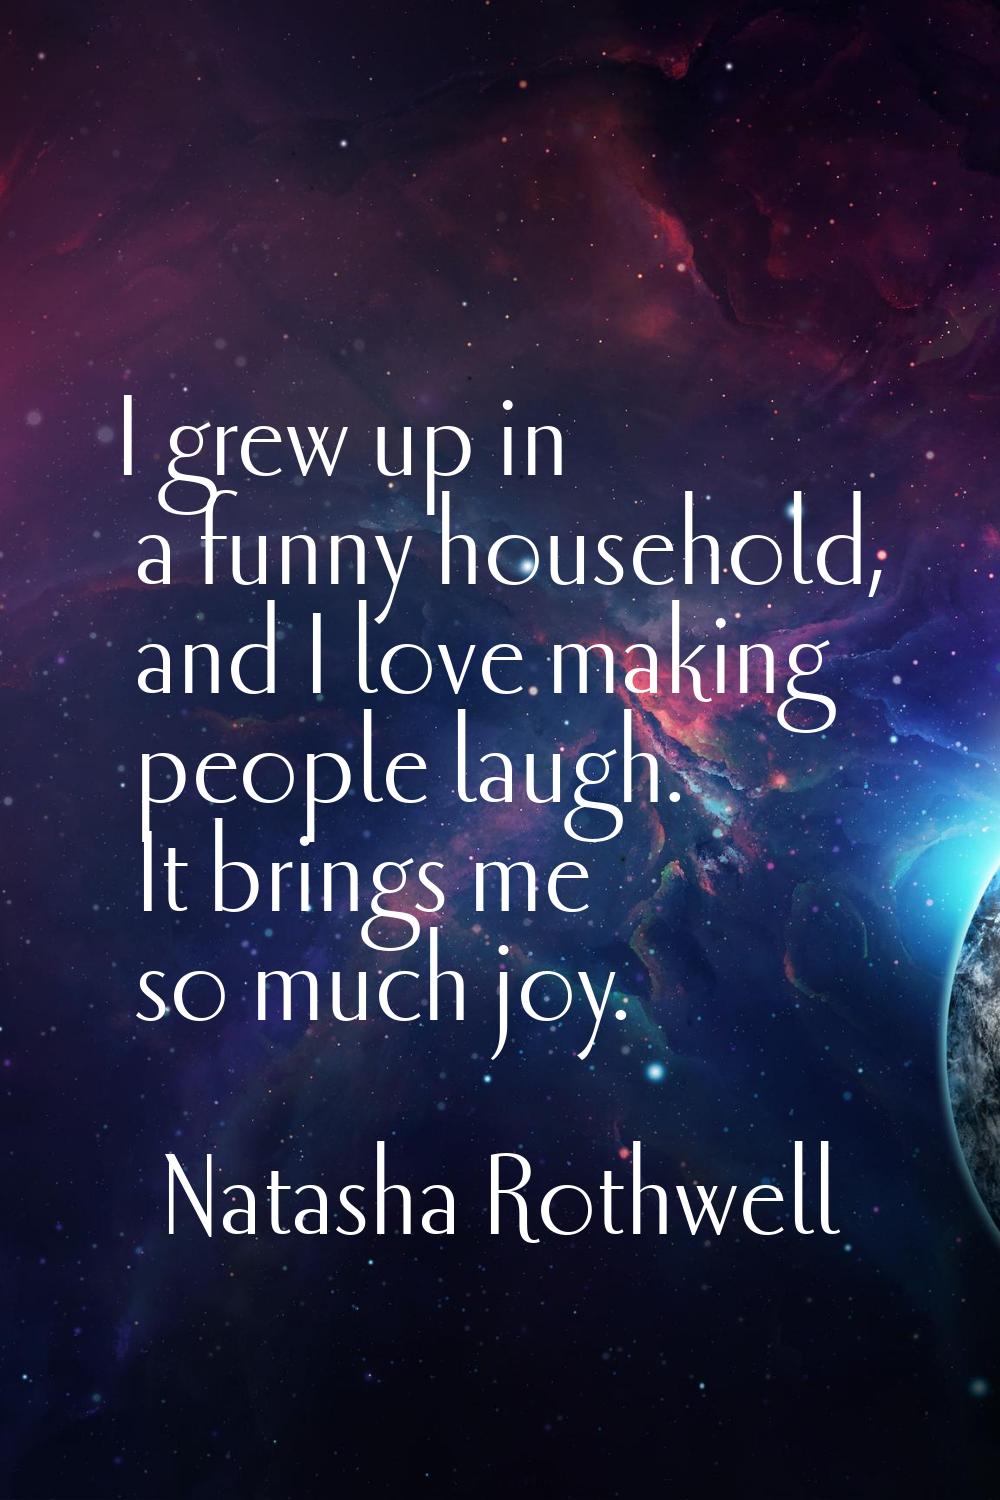 I grew up in a funny household, and I love making people laugh. It brings me so much joy.